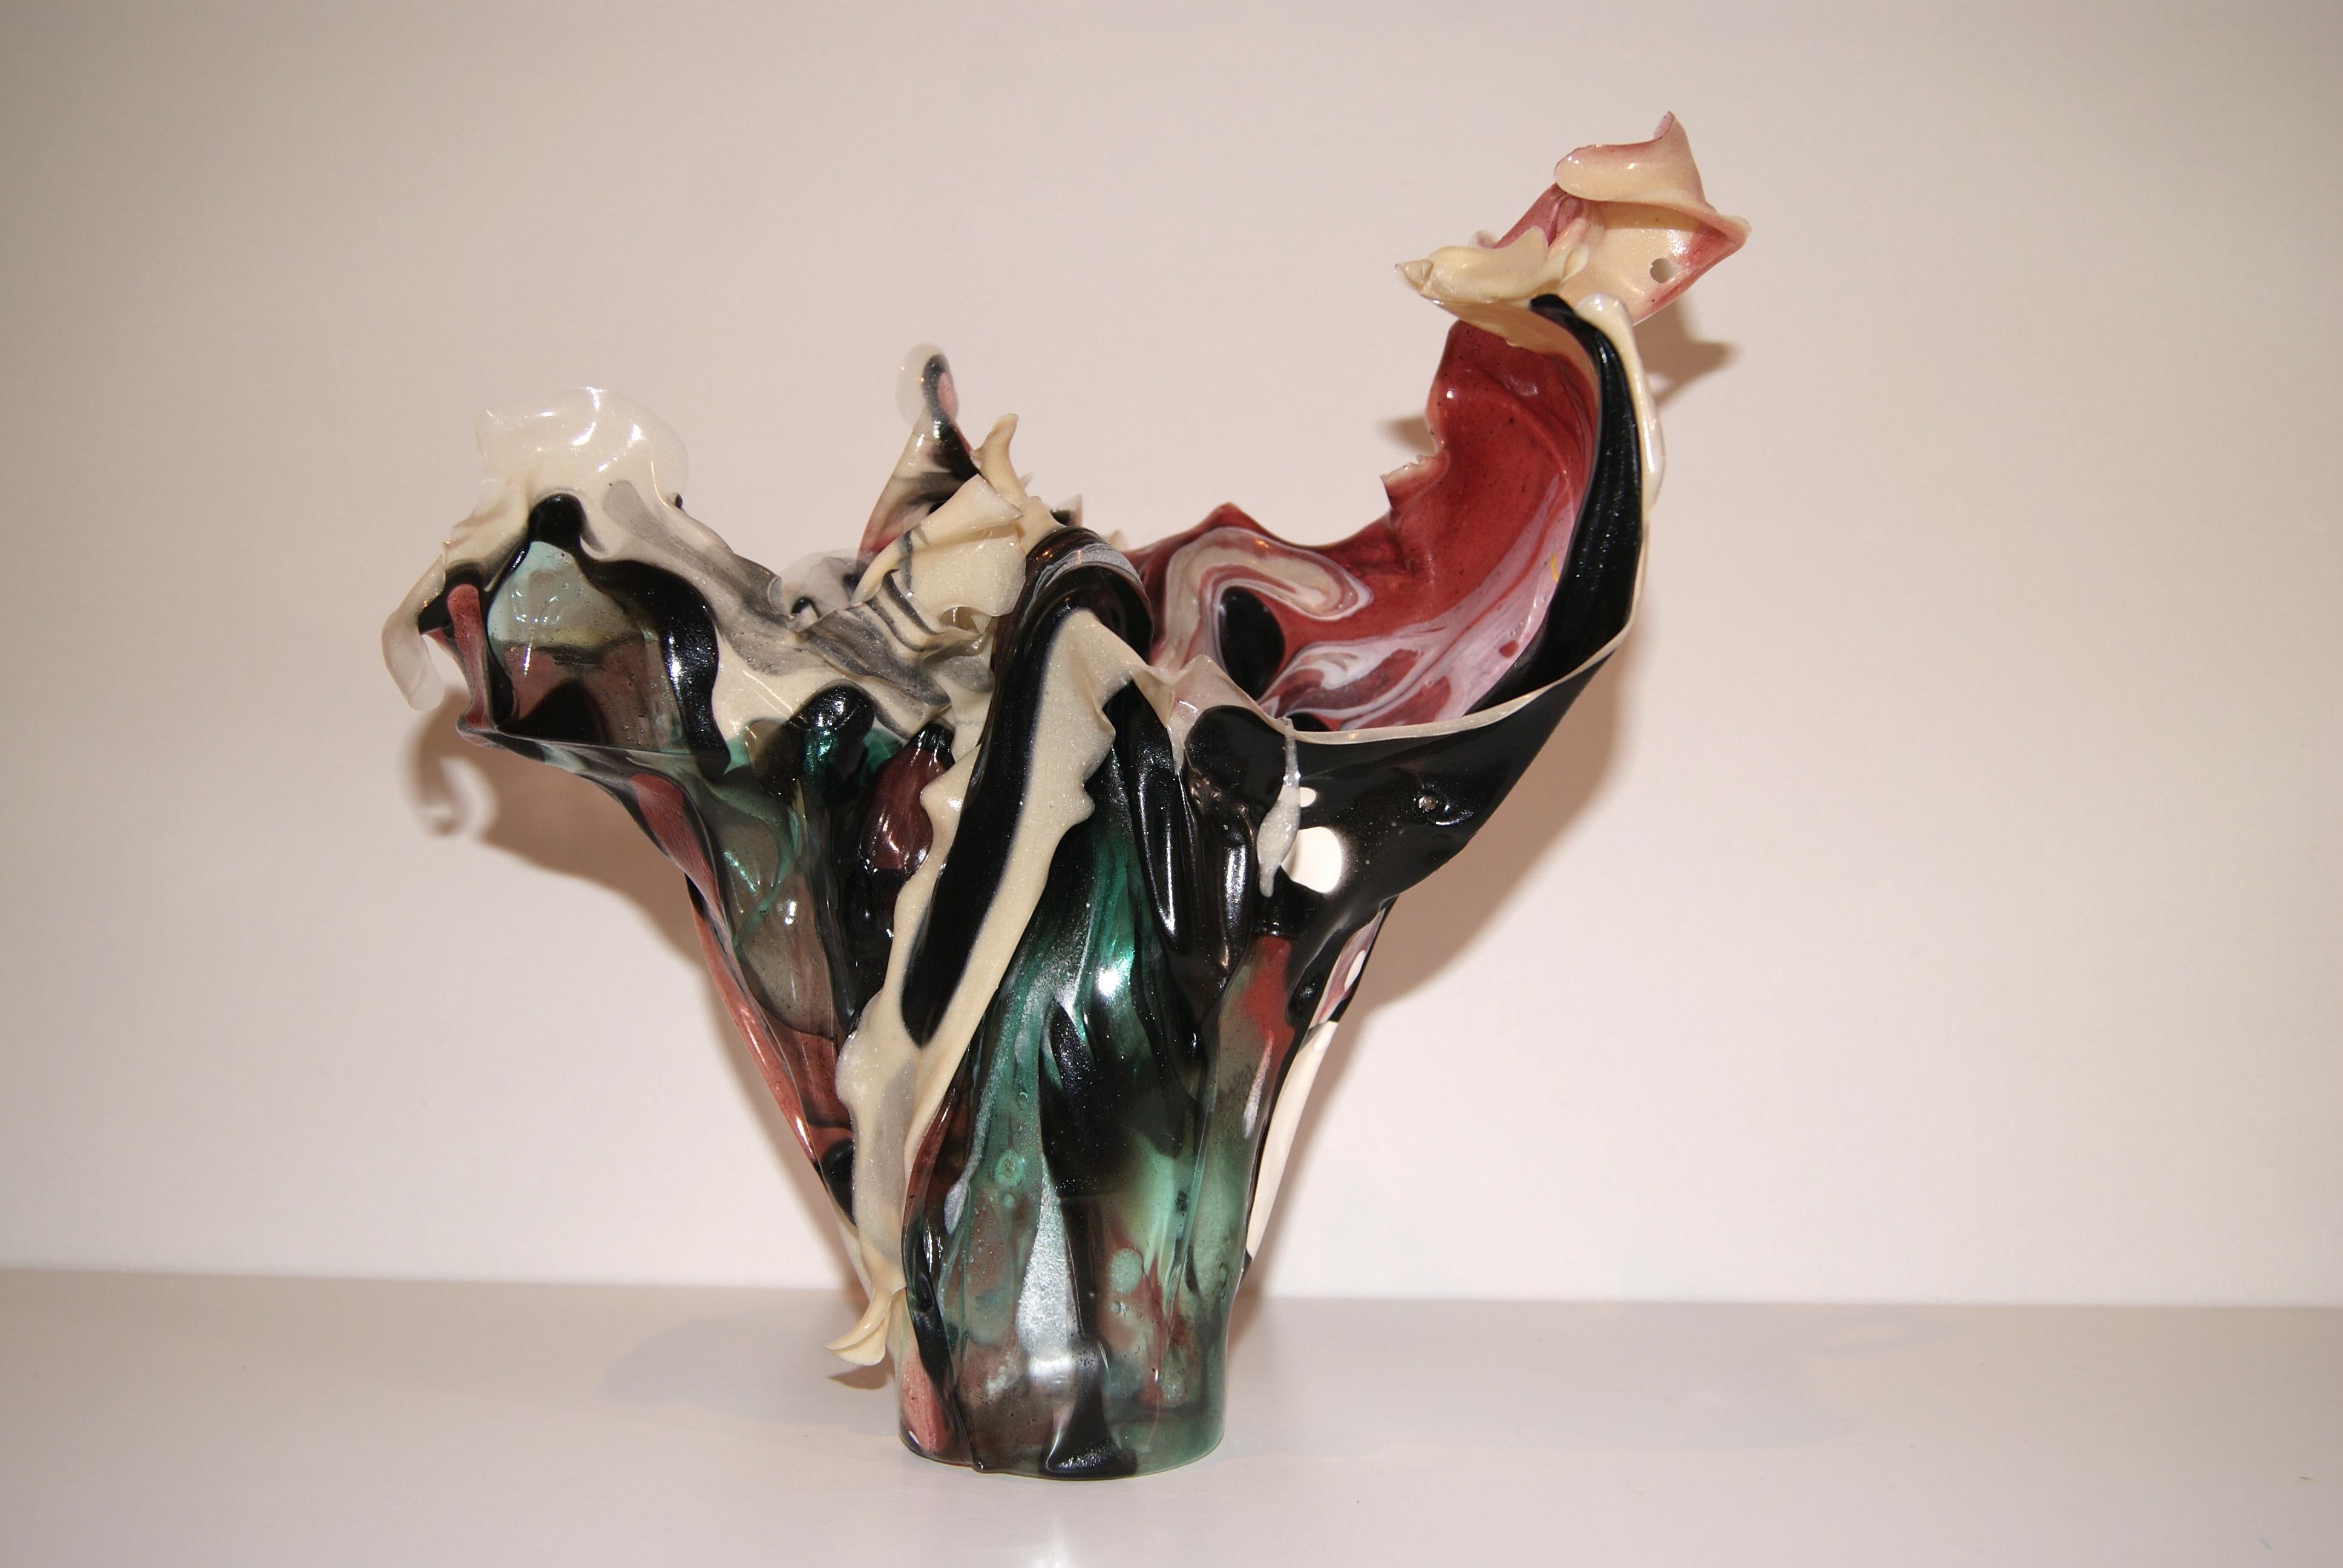 Stained glass inspired sculptural vessel. Made from biomaterials and coated in a epoxy resin.